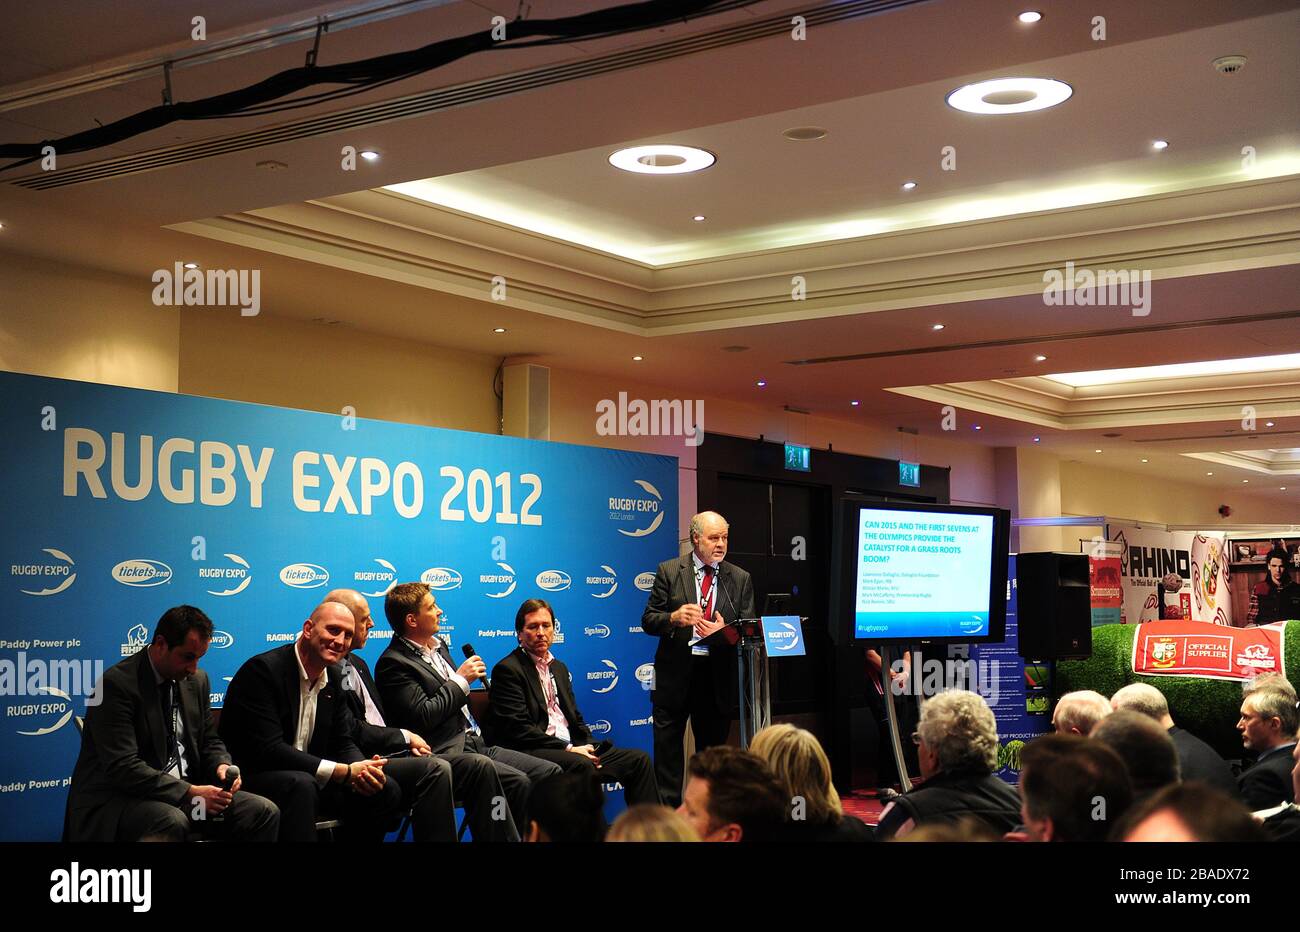 TalkSport's John Taylor (centre) hosts a talk with (left to right) Head of Rugby Growth for the RFU Alistair Marks, Former England captain Lawrence Dallaglio, Mark Egan from the IRB, SRU's Nick Rennie and Mark Mccafferty from Premiership Rugby during Day Two of the Rugby Expo 2012 Stock Photo